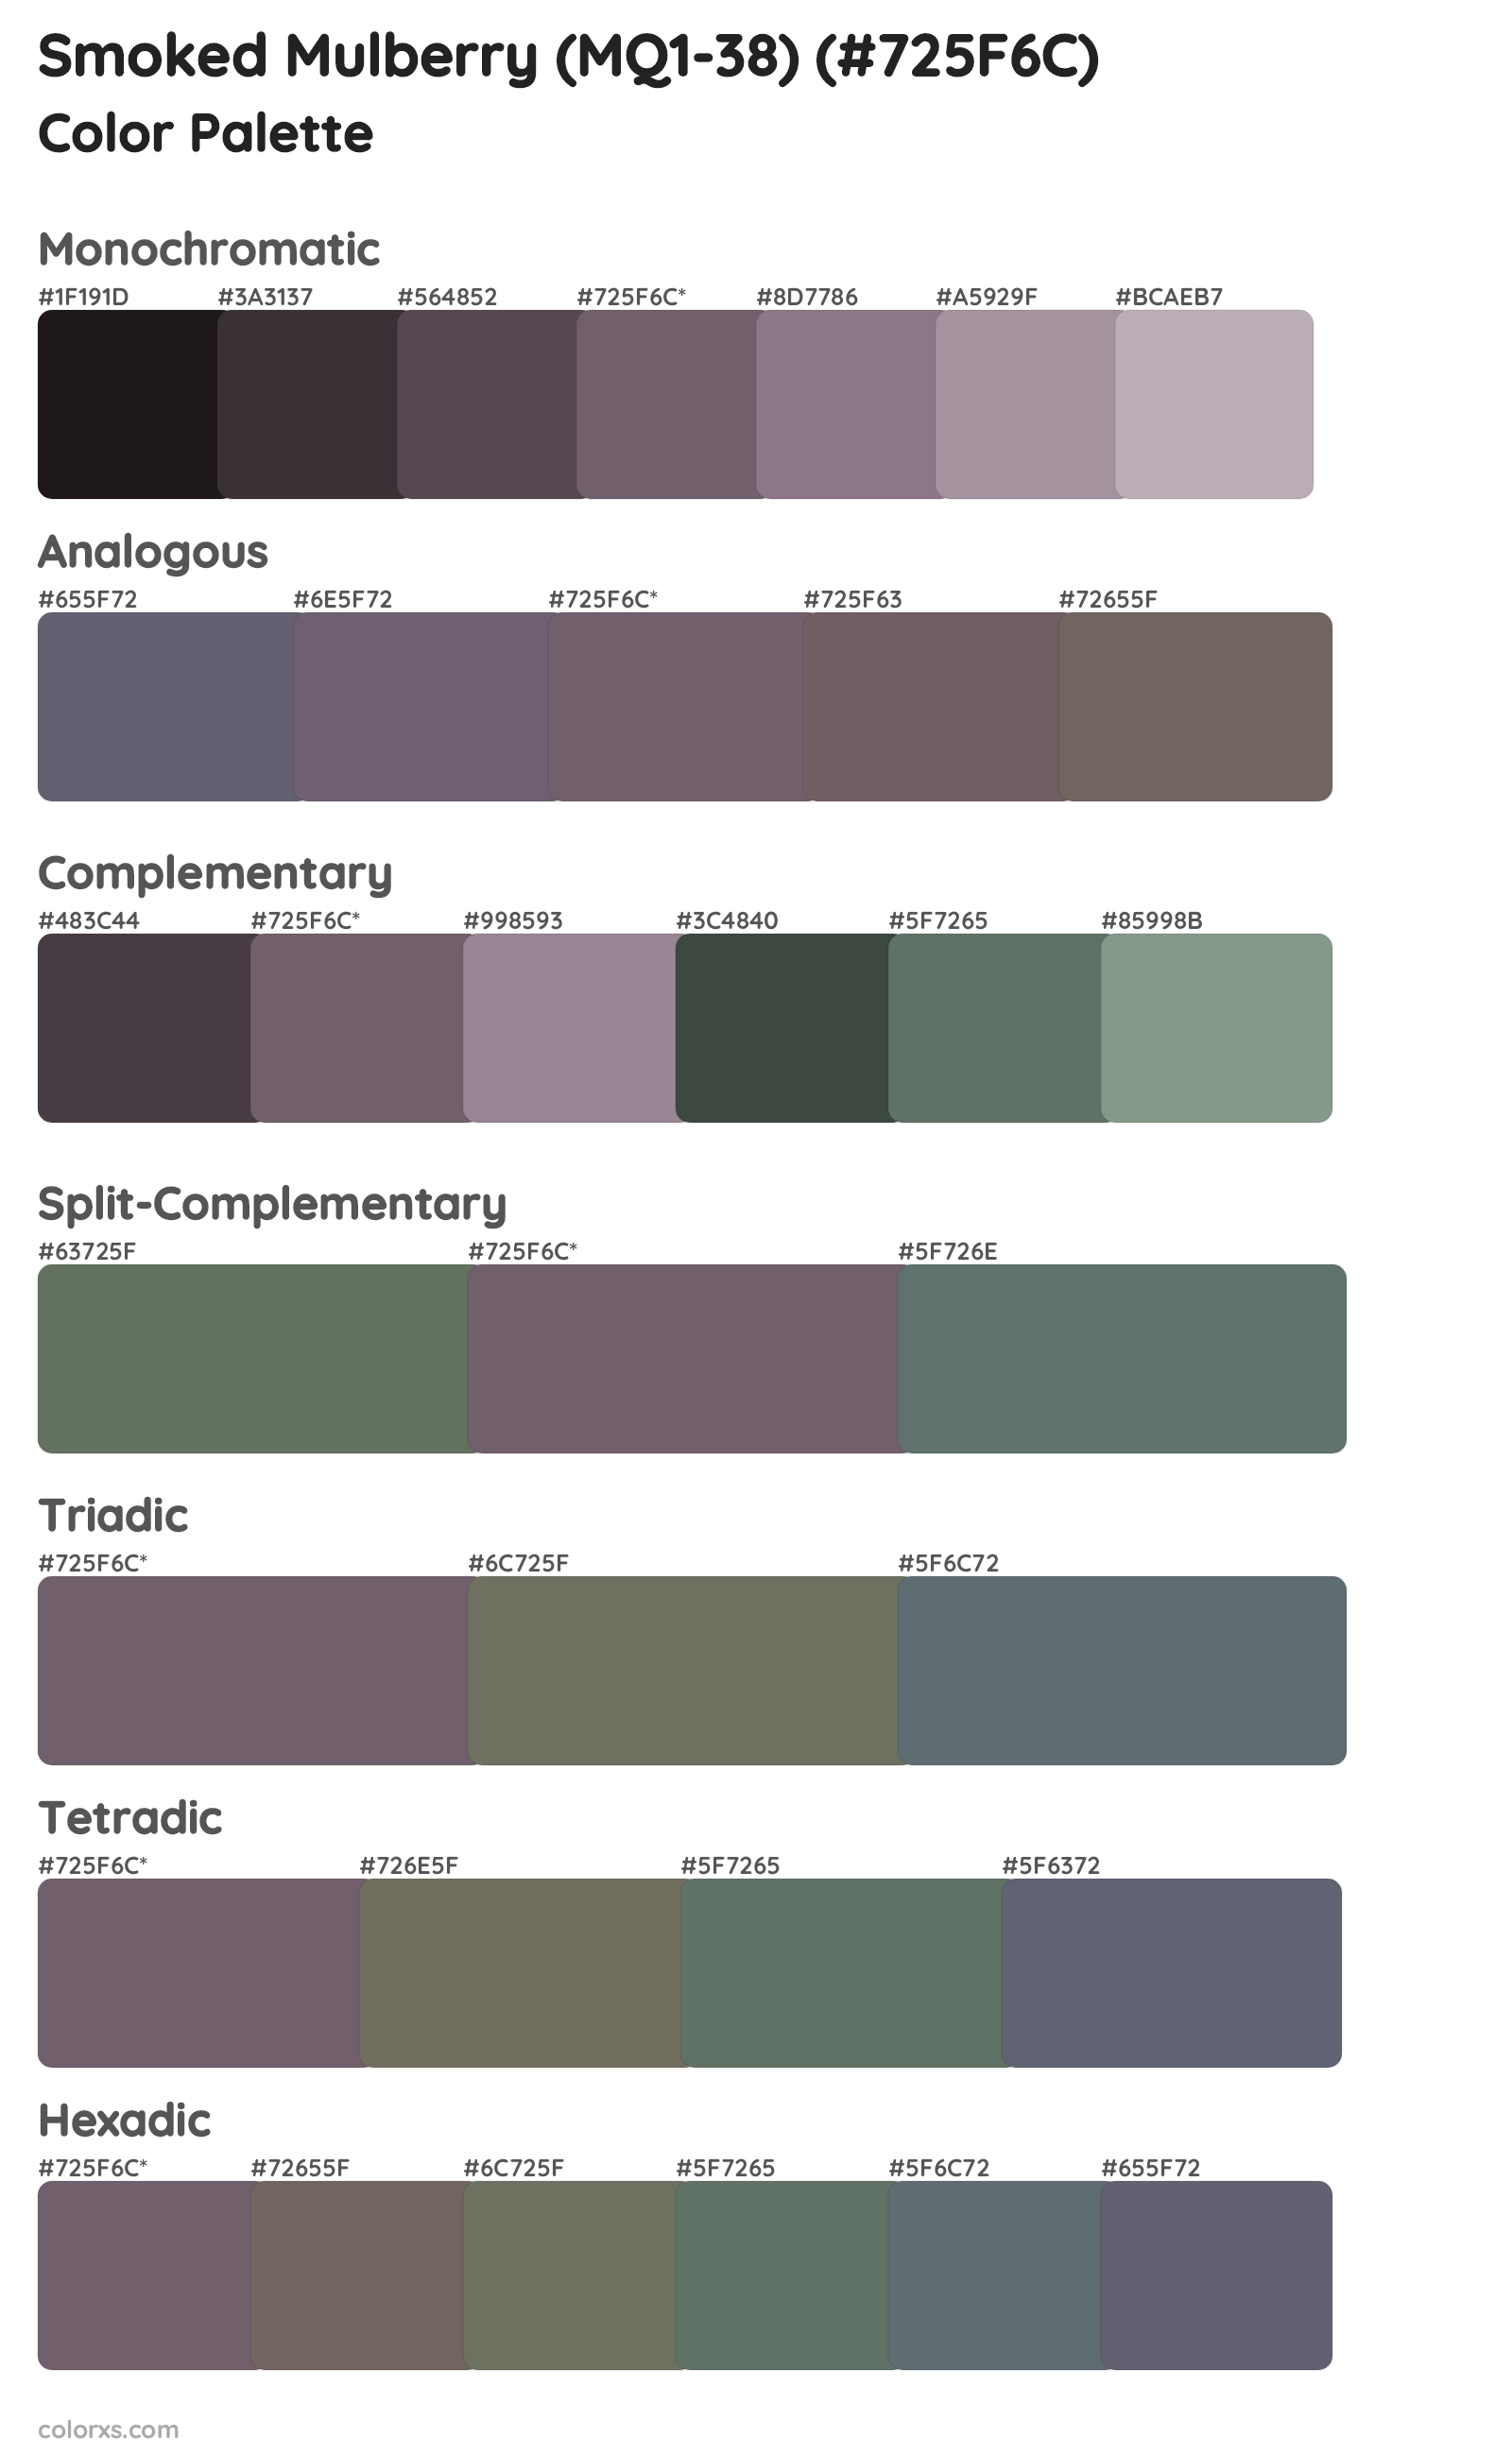 Smoked Mulberry (MQ1-38) Color Scheme Palettes